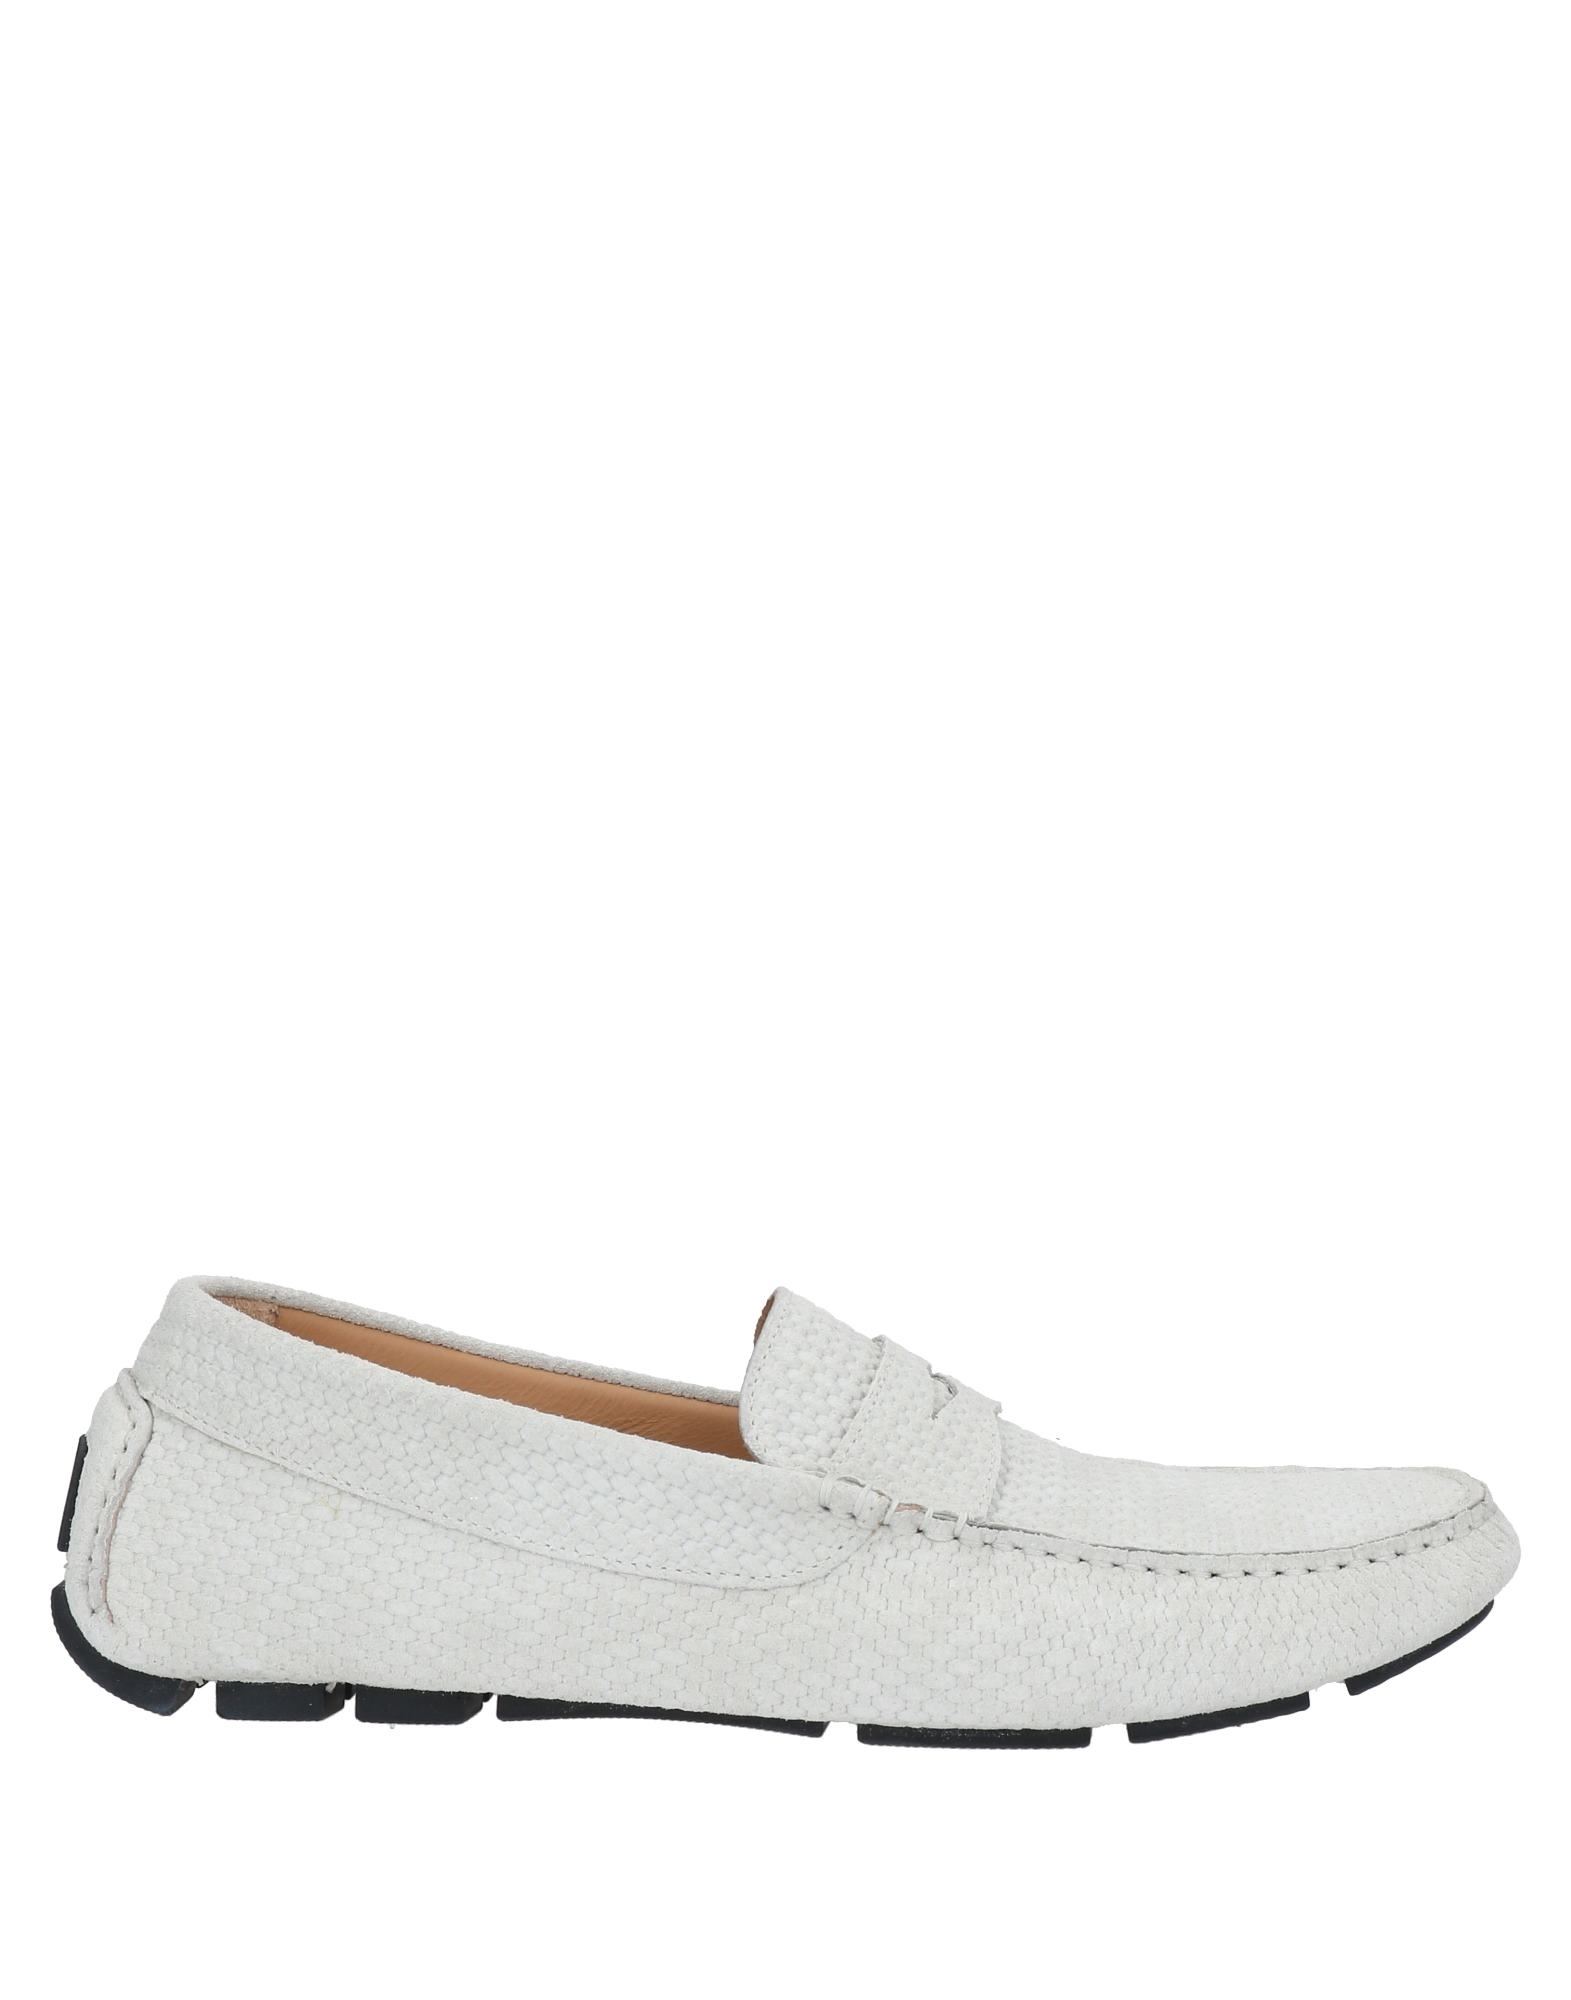 Boemos Loafers In White